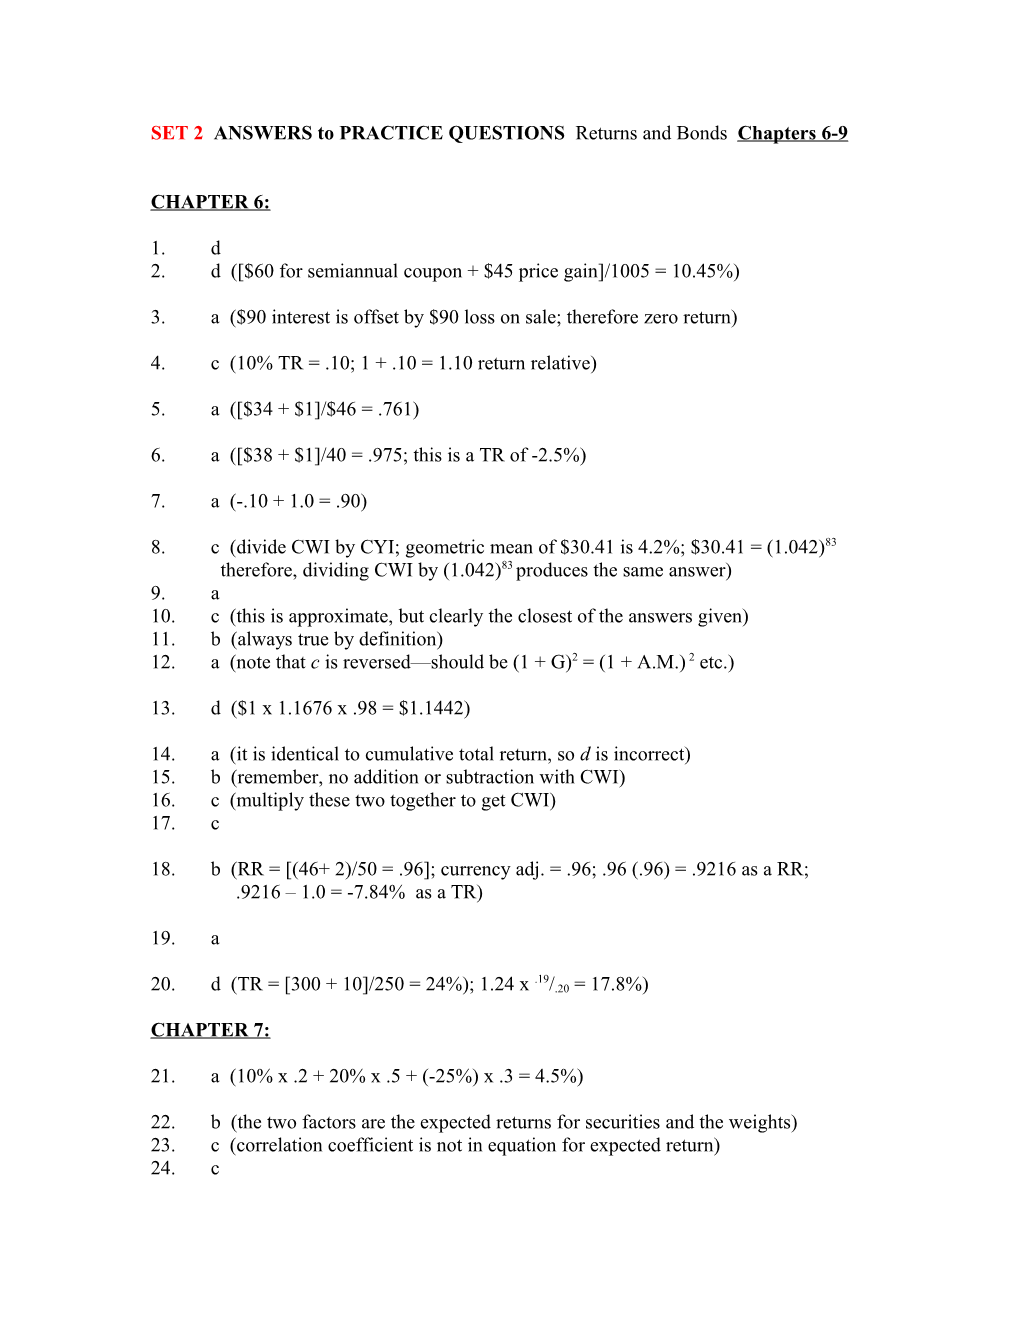 SET 2 ANSWERS to PRACTICE QUESTIONS Returns and Bonds Chapters 6-9